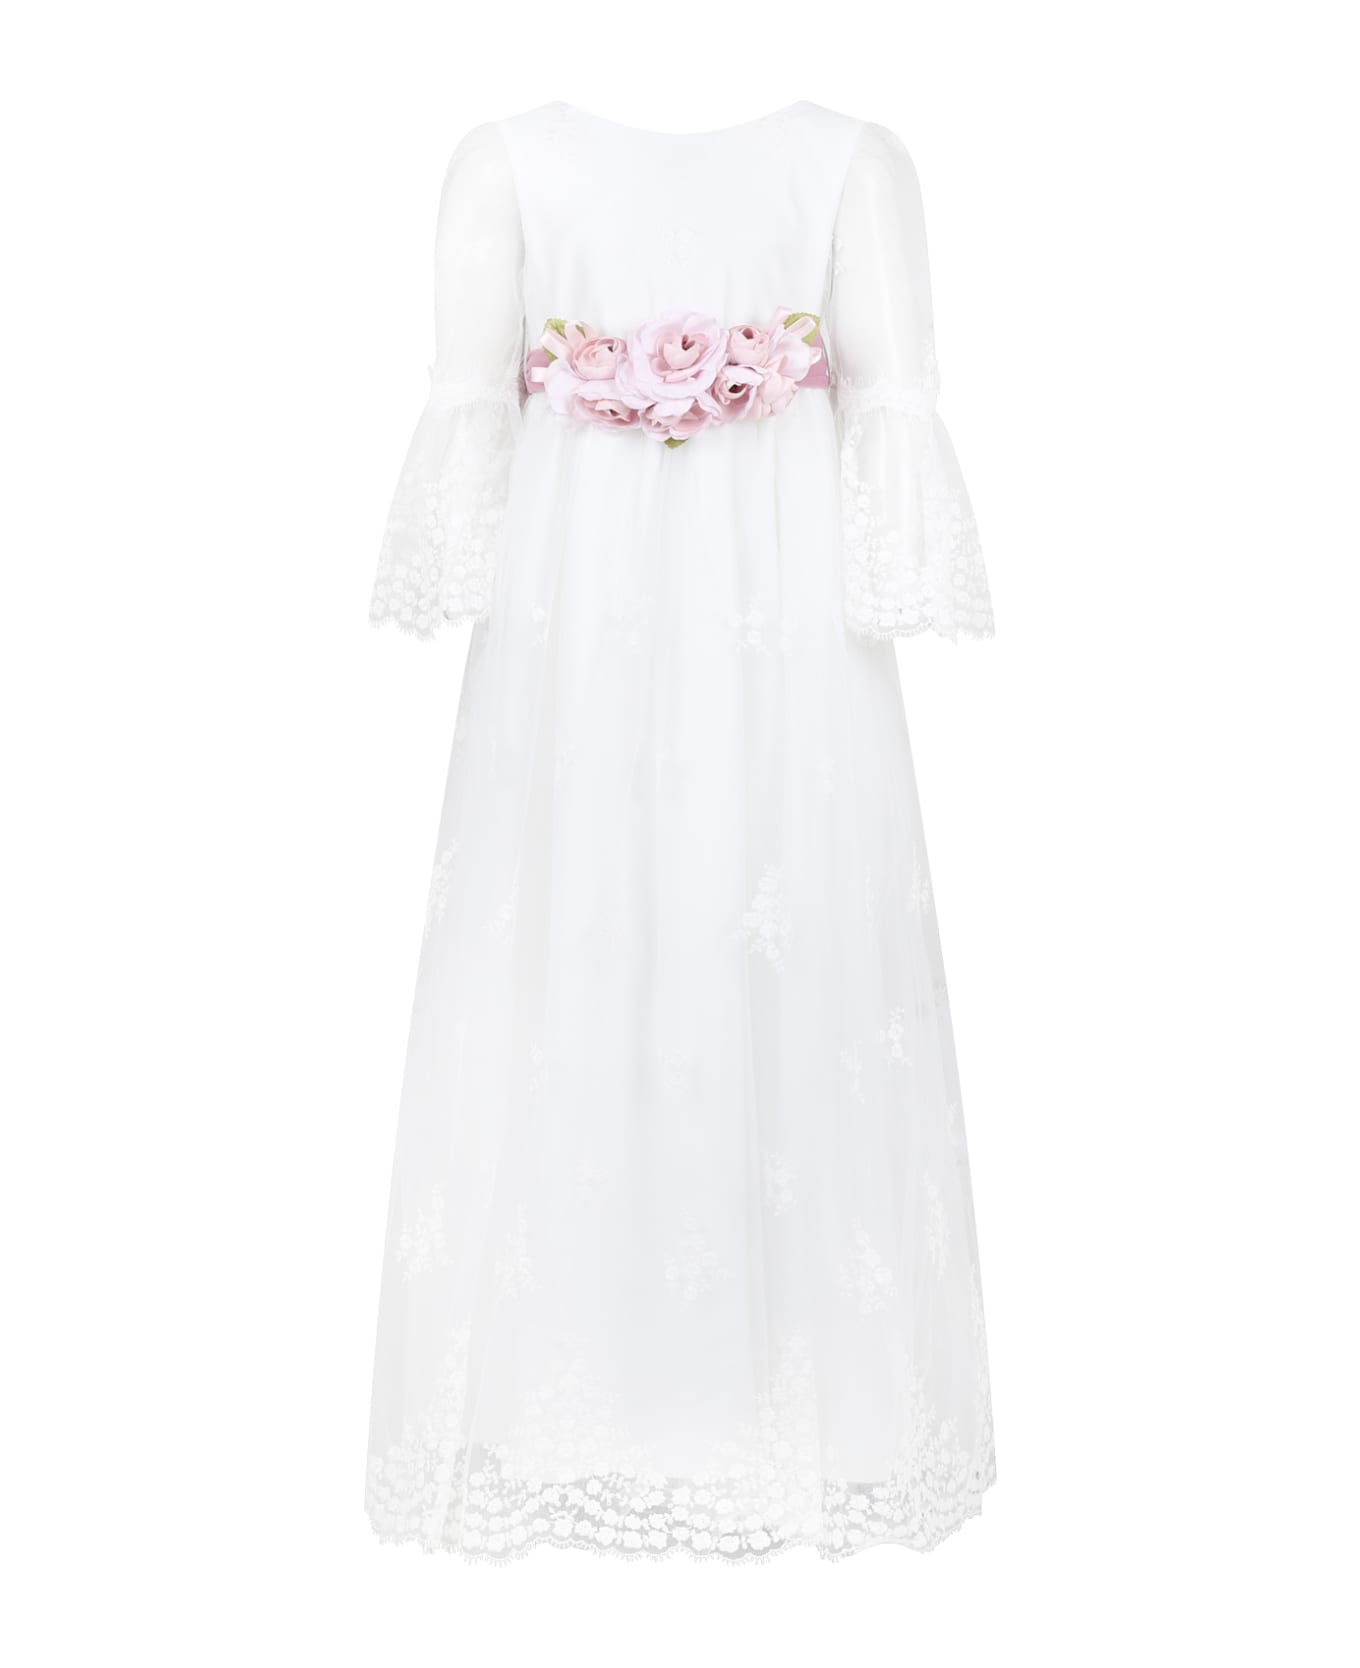 Monnalisa Long White Dress For Girl With Embroidery - White